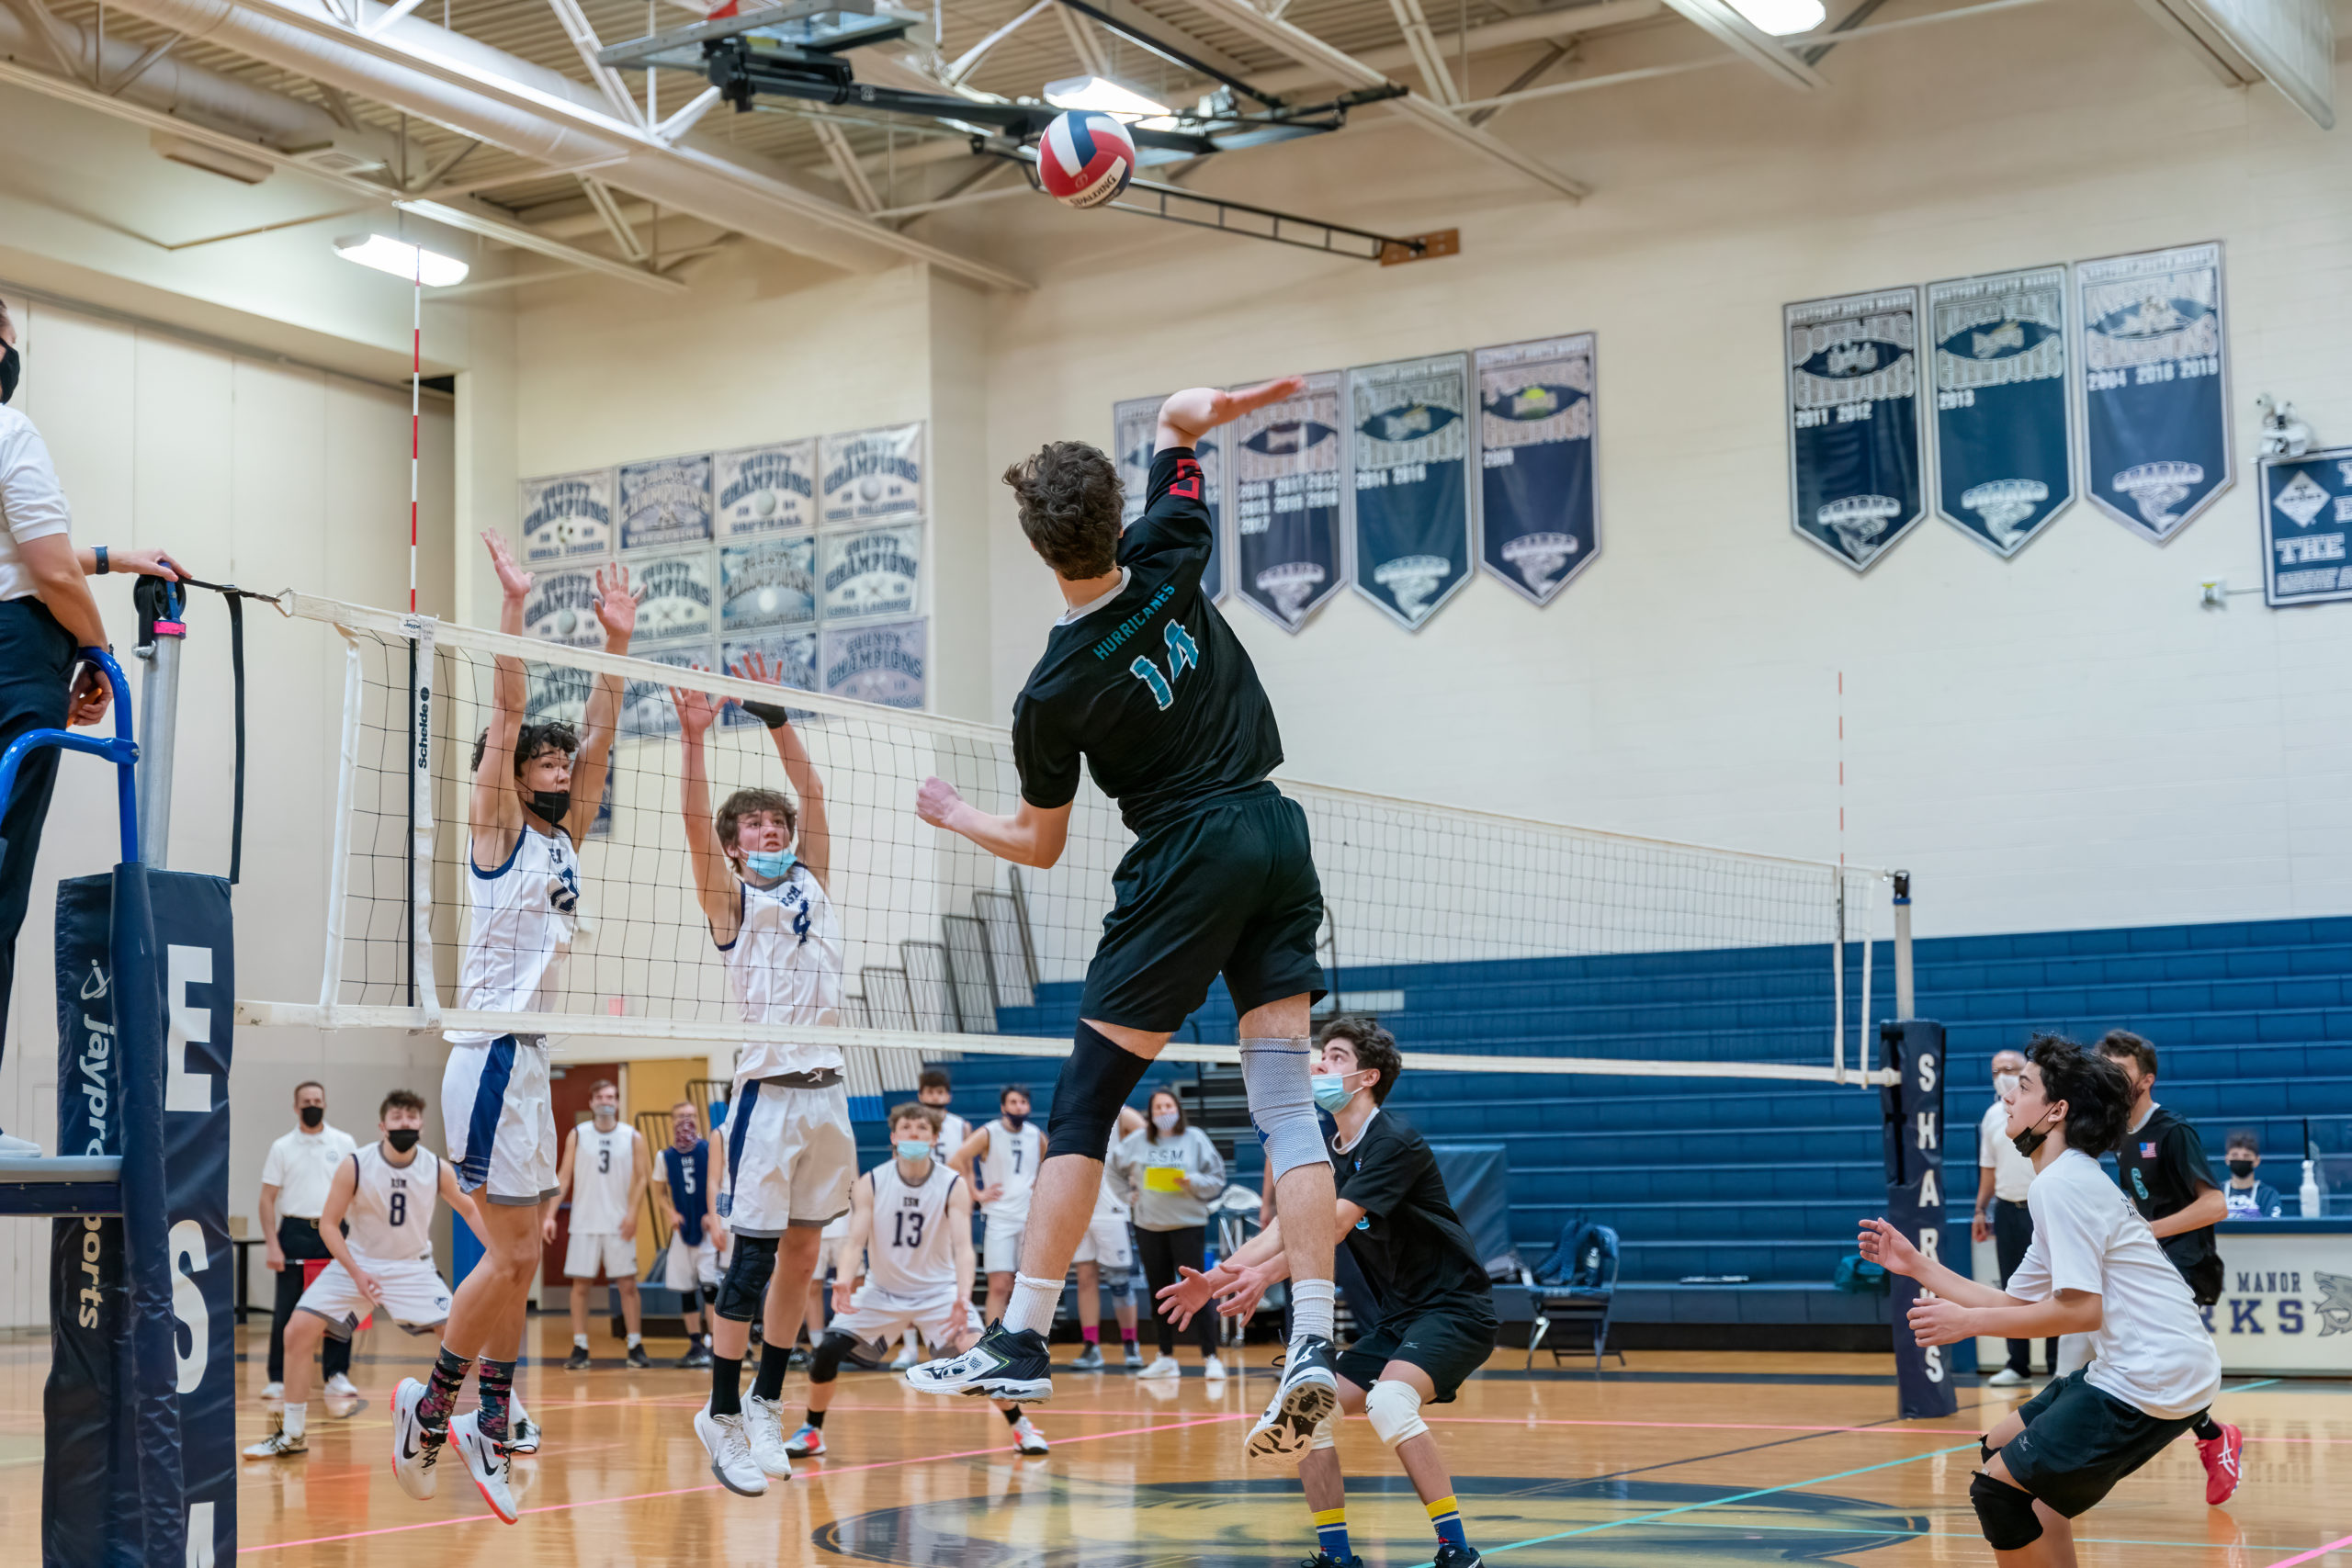 Daniel Haber of Westhampton Beach gets set to attempt a kill.